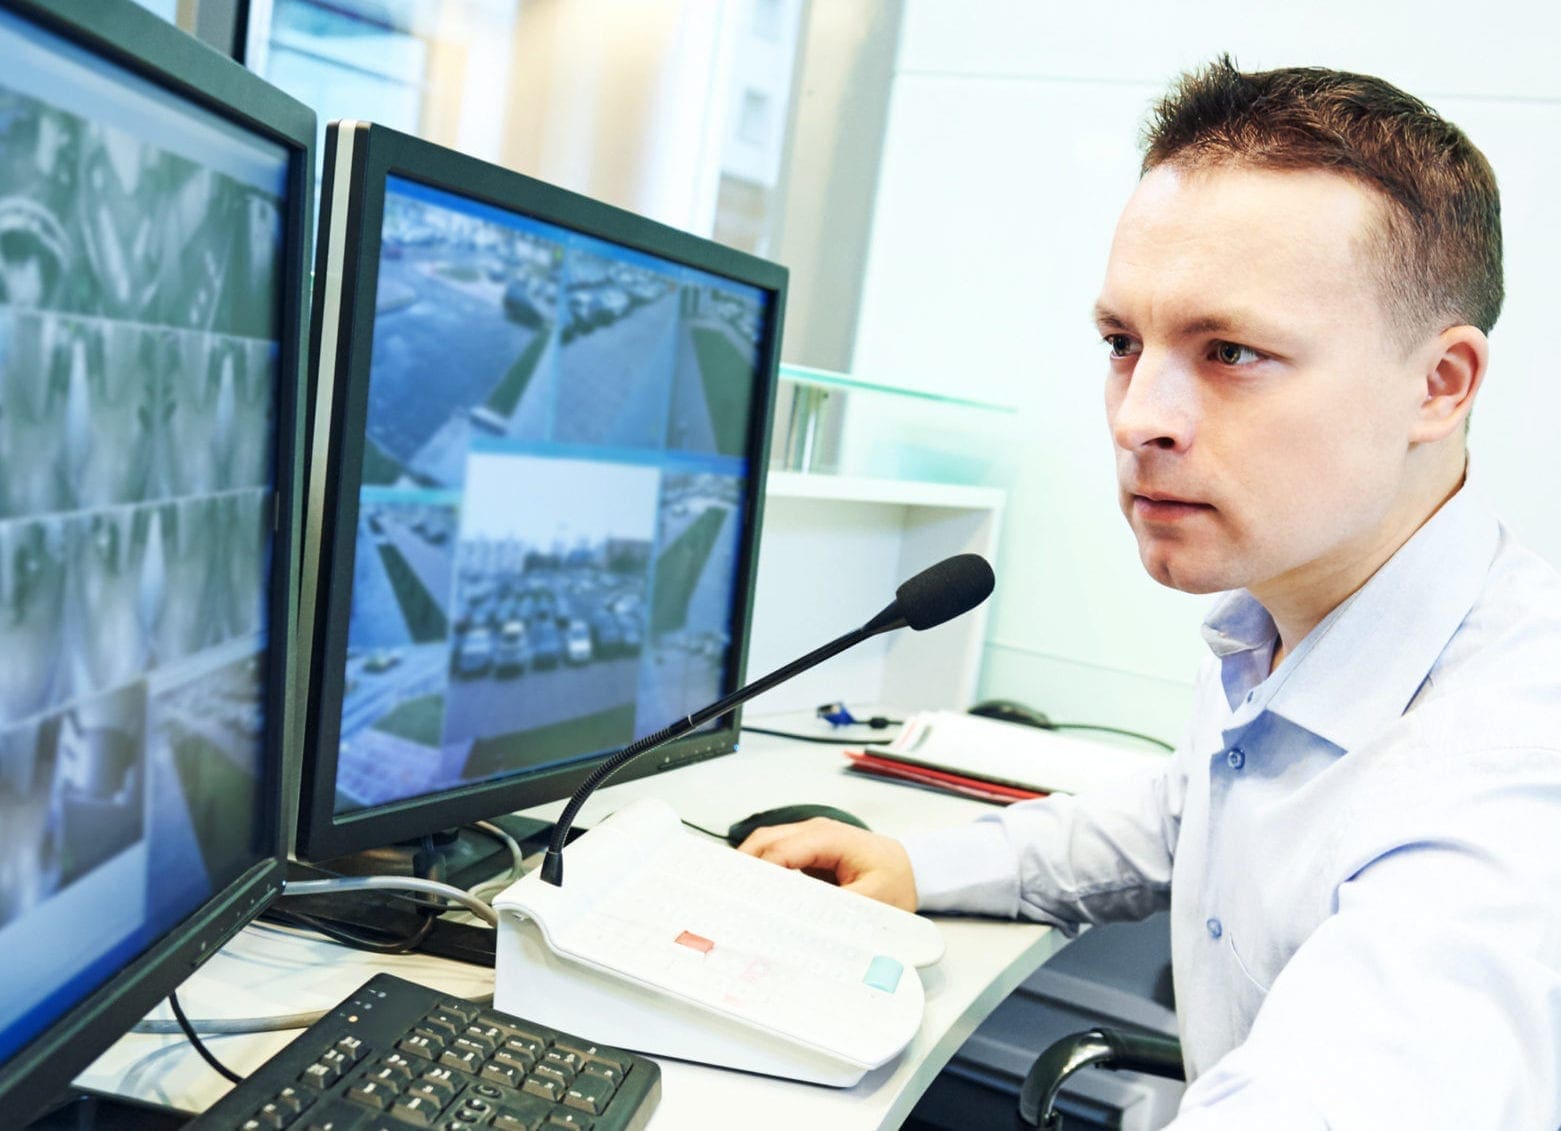 Worker monitoring Video Security System